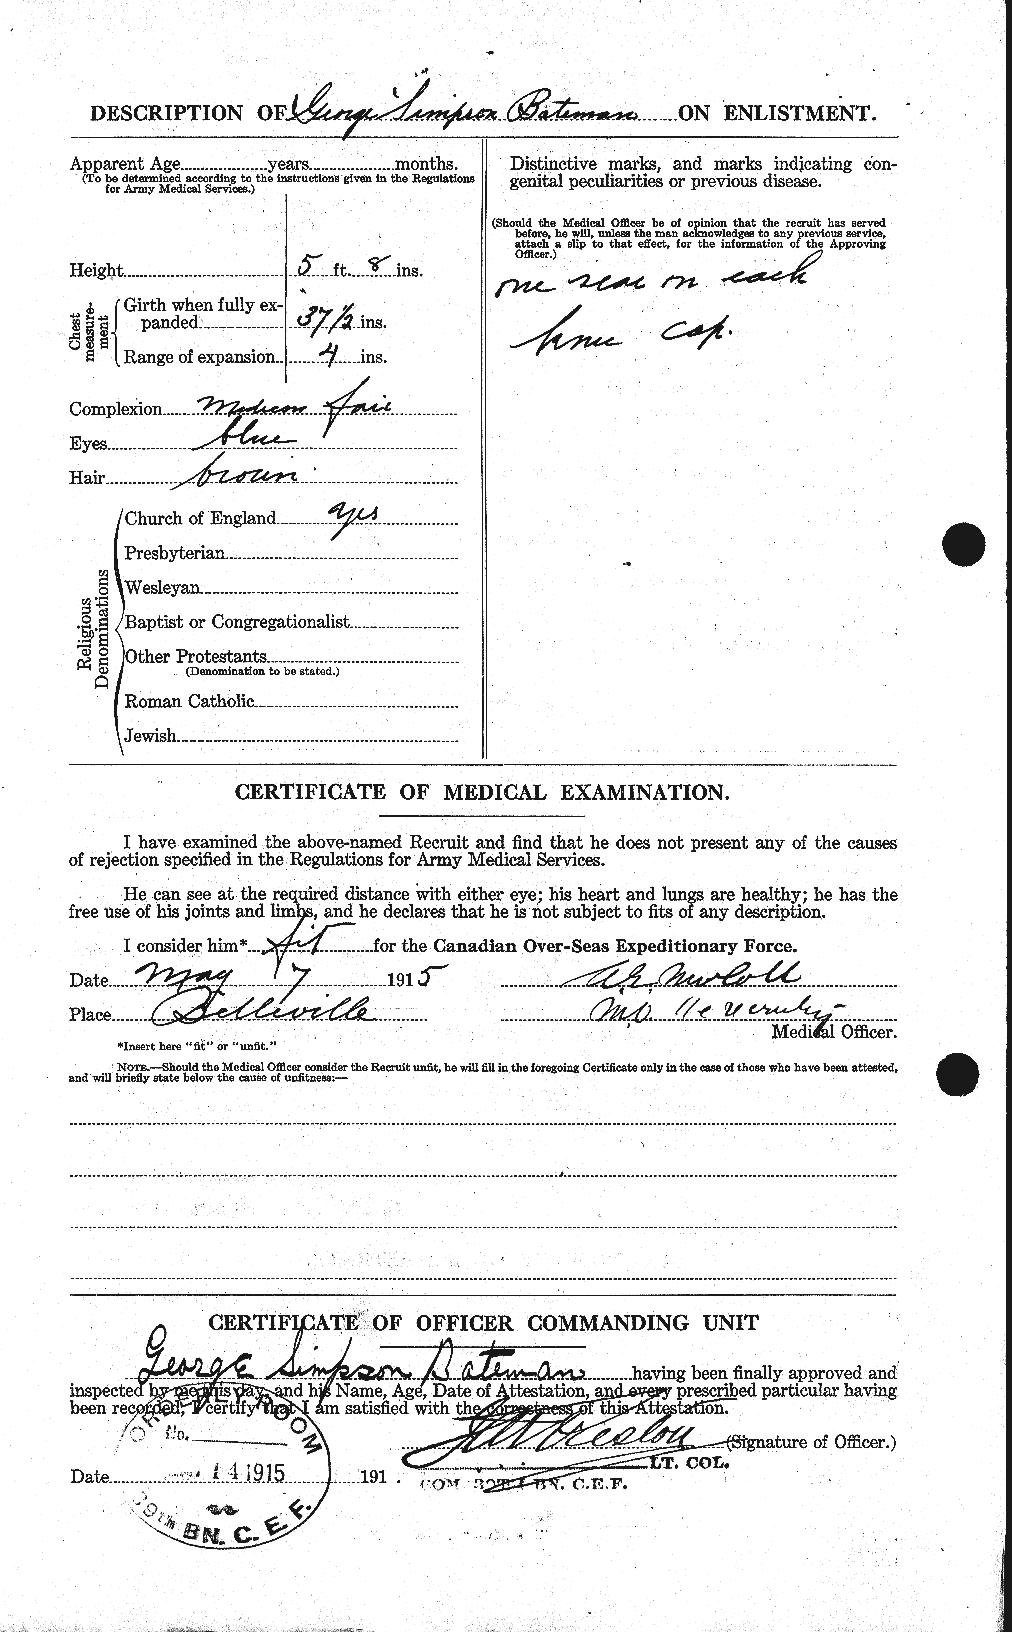 Personnel Records of the First World War - CEF 228029b